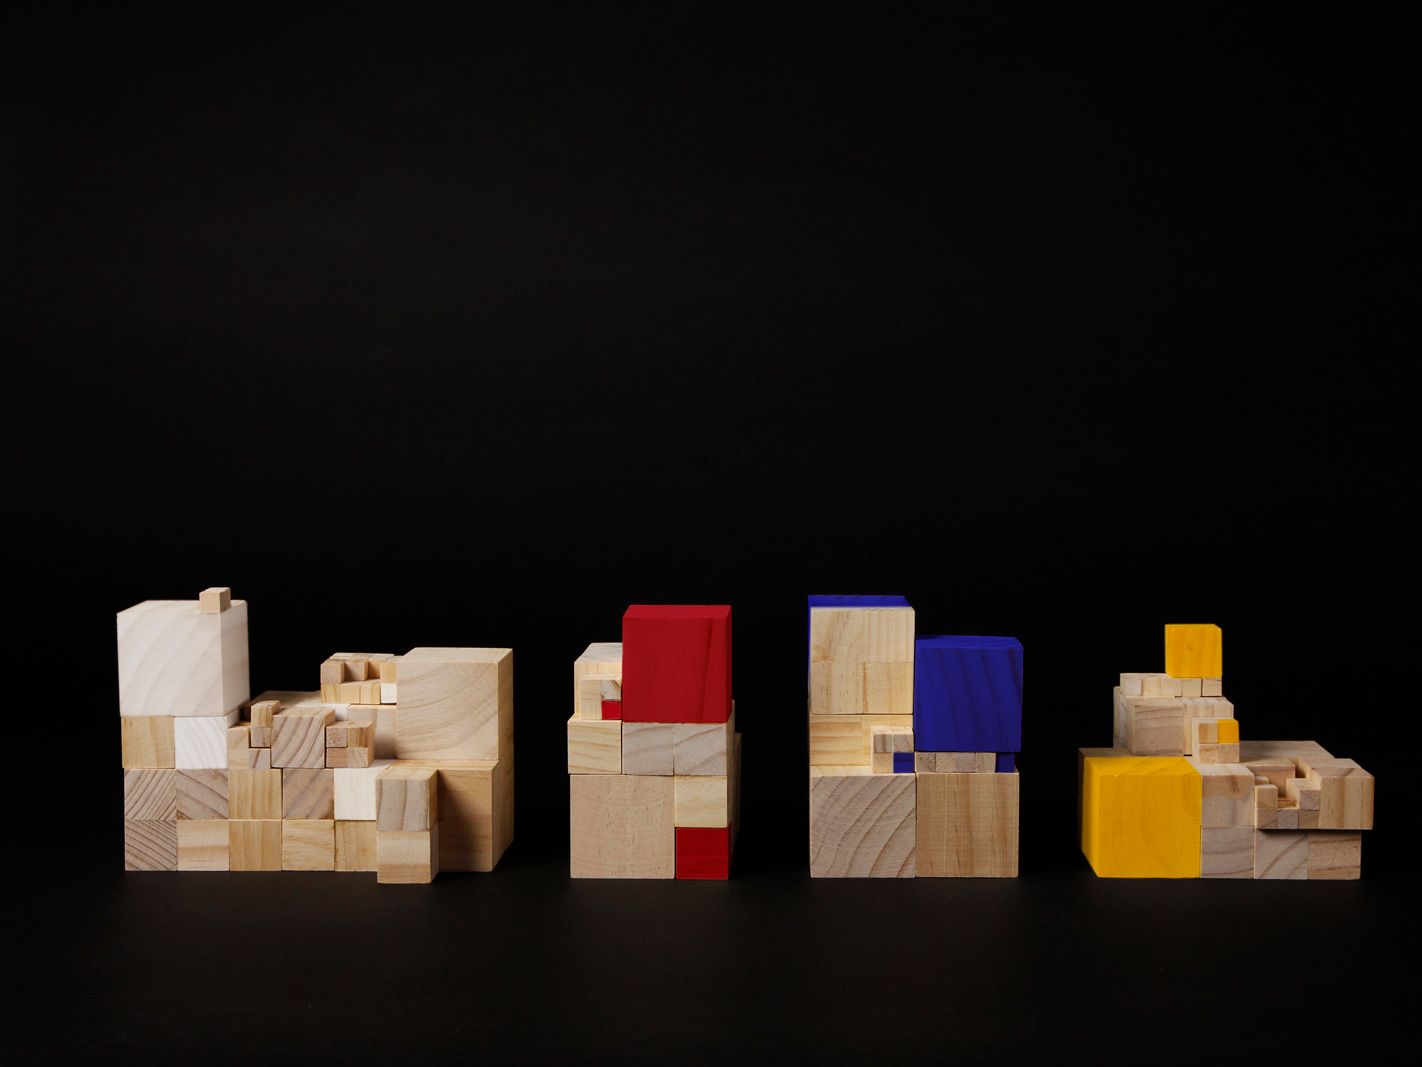 Wooden cube bricks, some coloured in red, yellow and blue, stacked into piles.